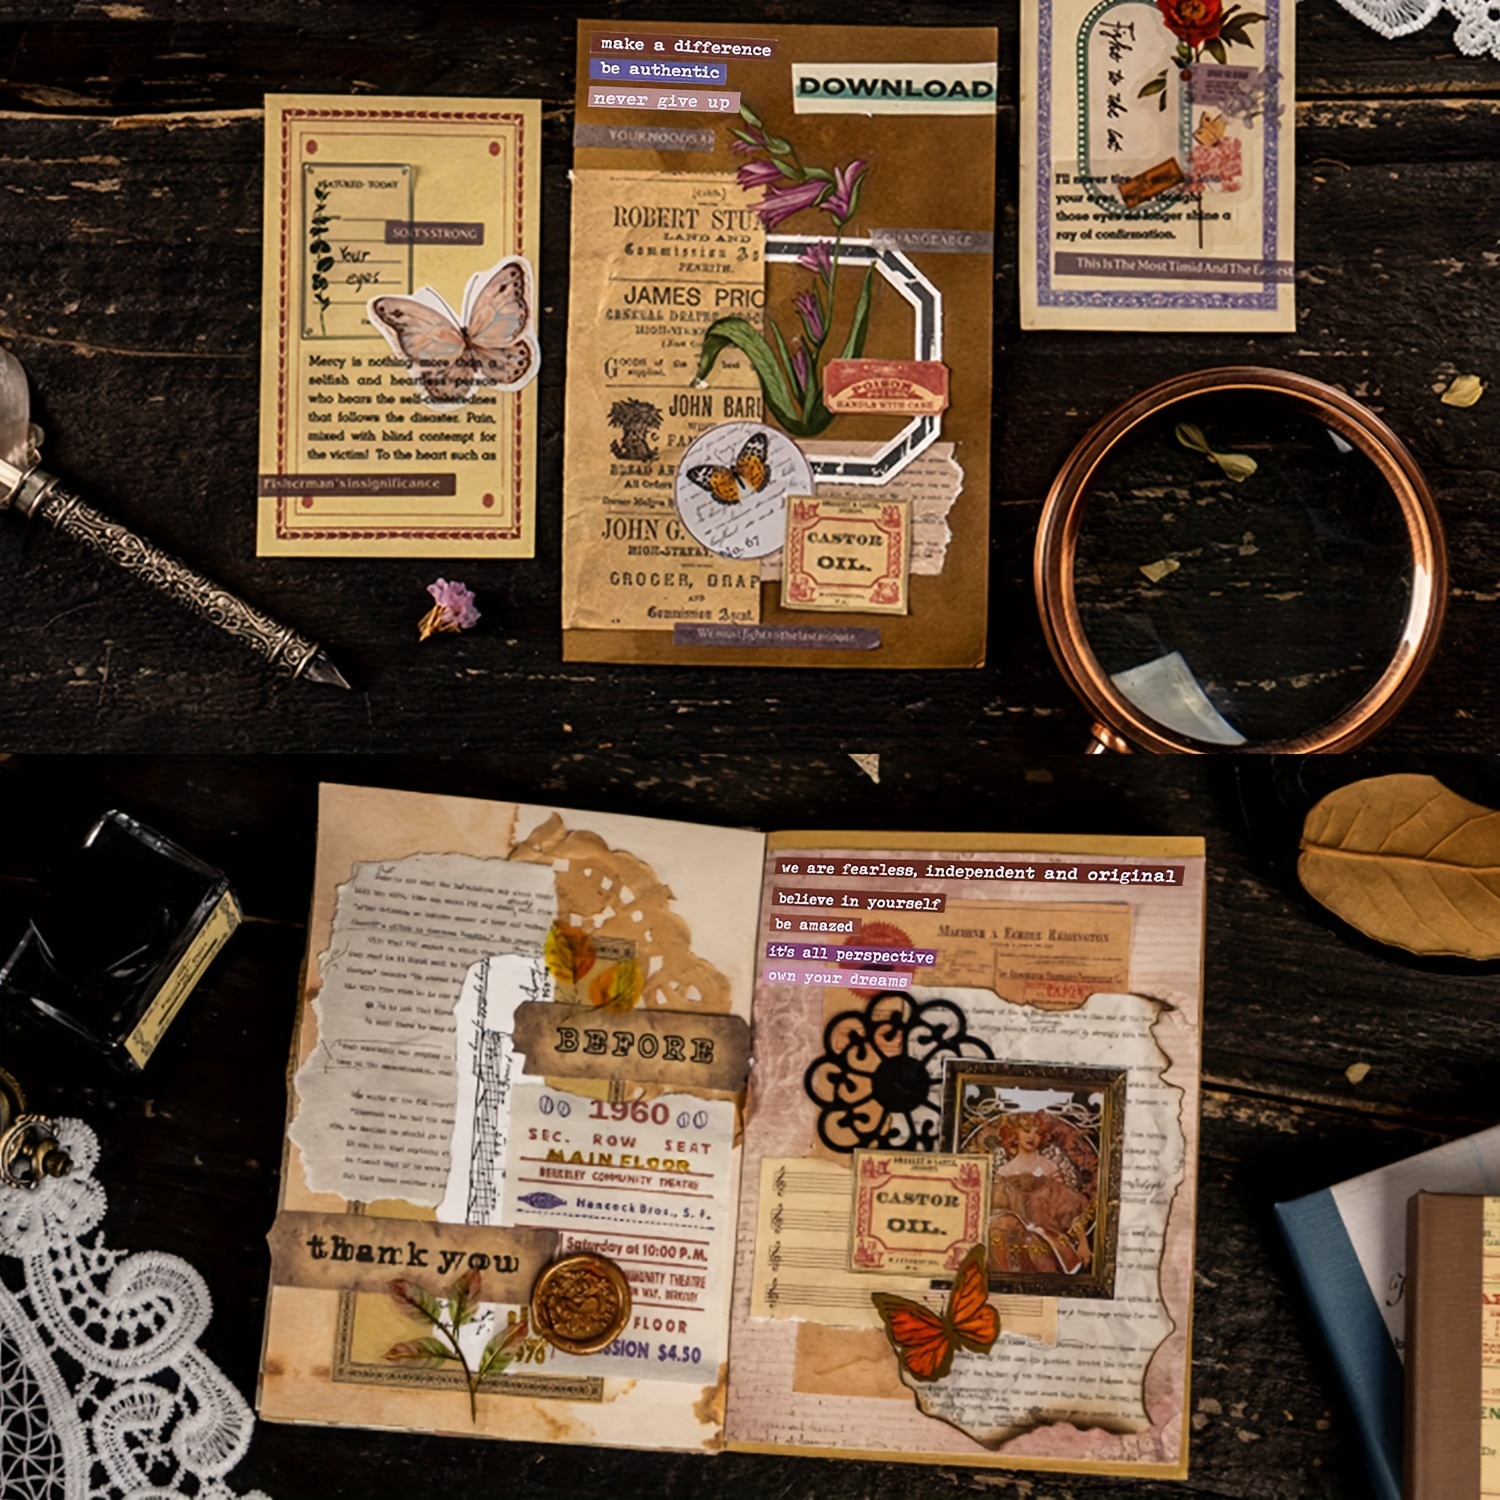 Vintage Junk Journal Stickers - Decorate Your Planner and Scrapbook